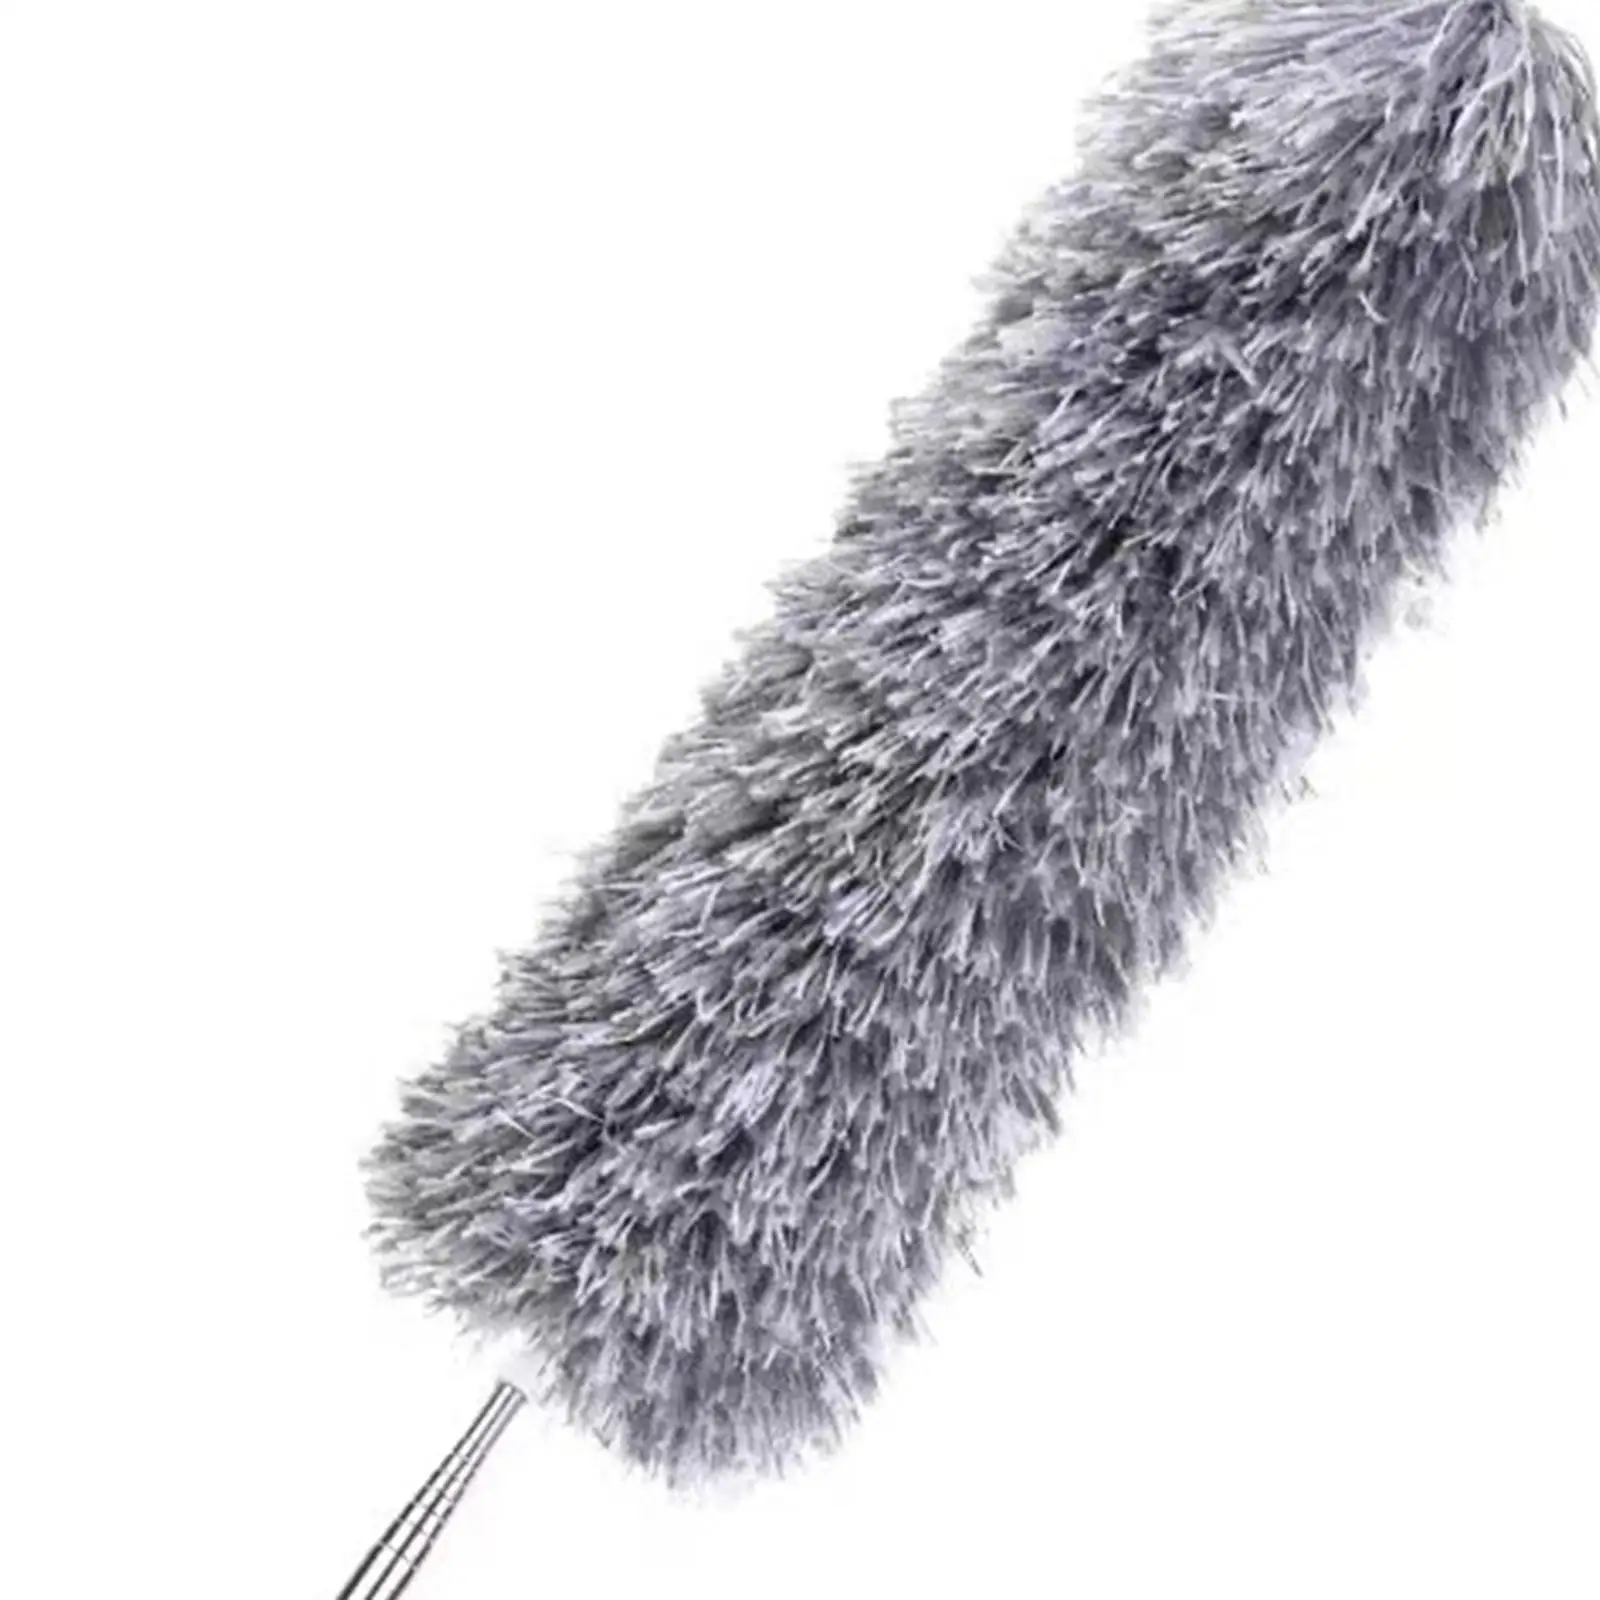 Long Broom Microfiber Duster Extendable 80 to 280cm Flexiable Head with Extension Pole 31inch to 110inch Convenient Washable